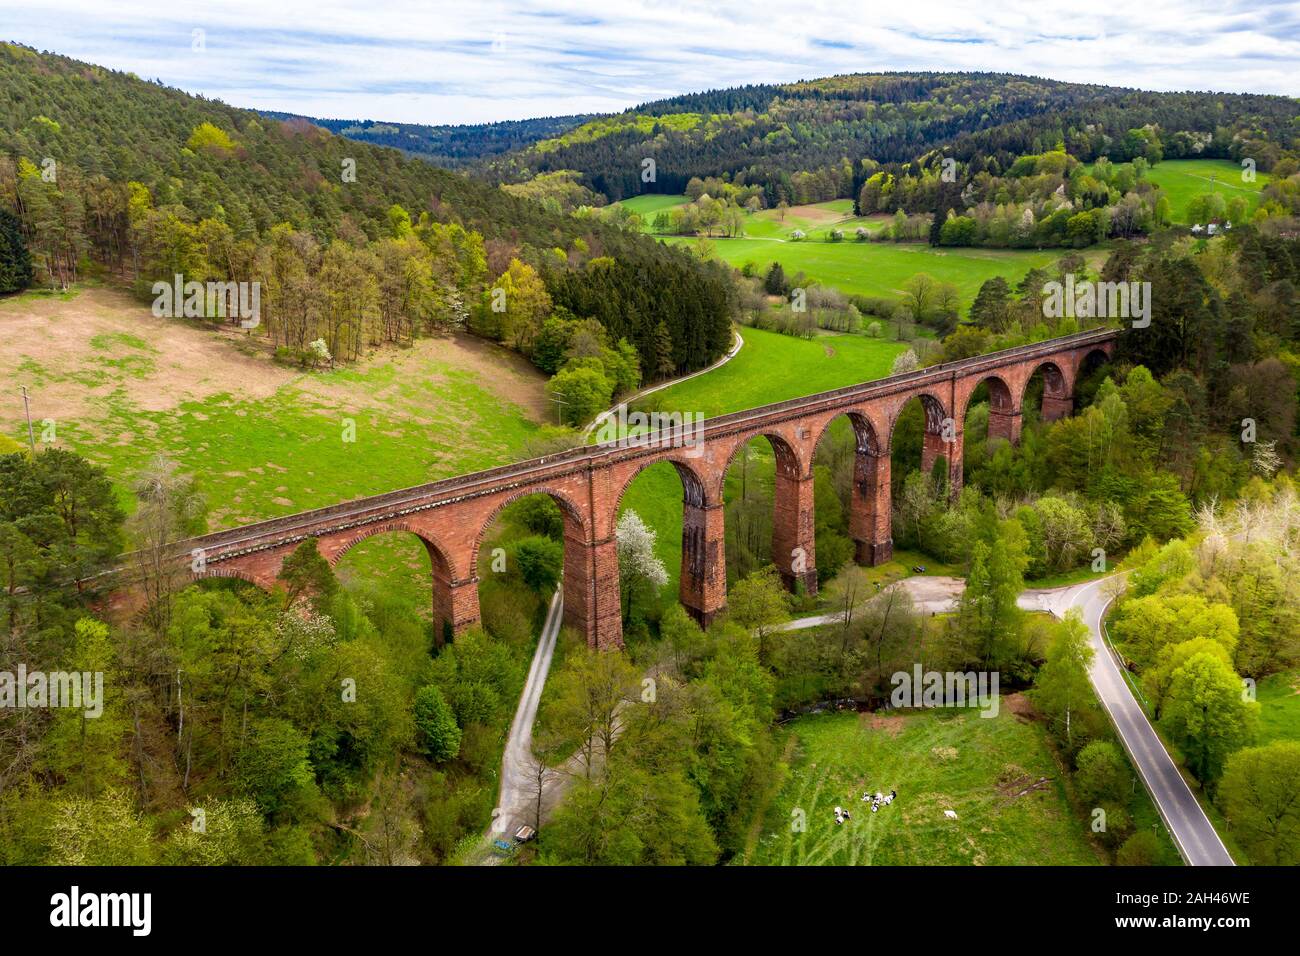 Germany, Hesse, Erbach, Aerial view of Himbachel Viaduct Stock Photo